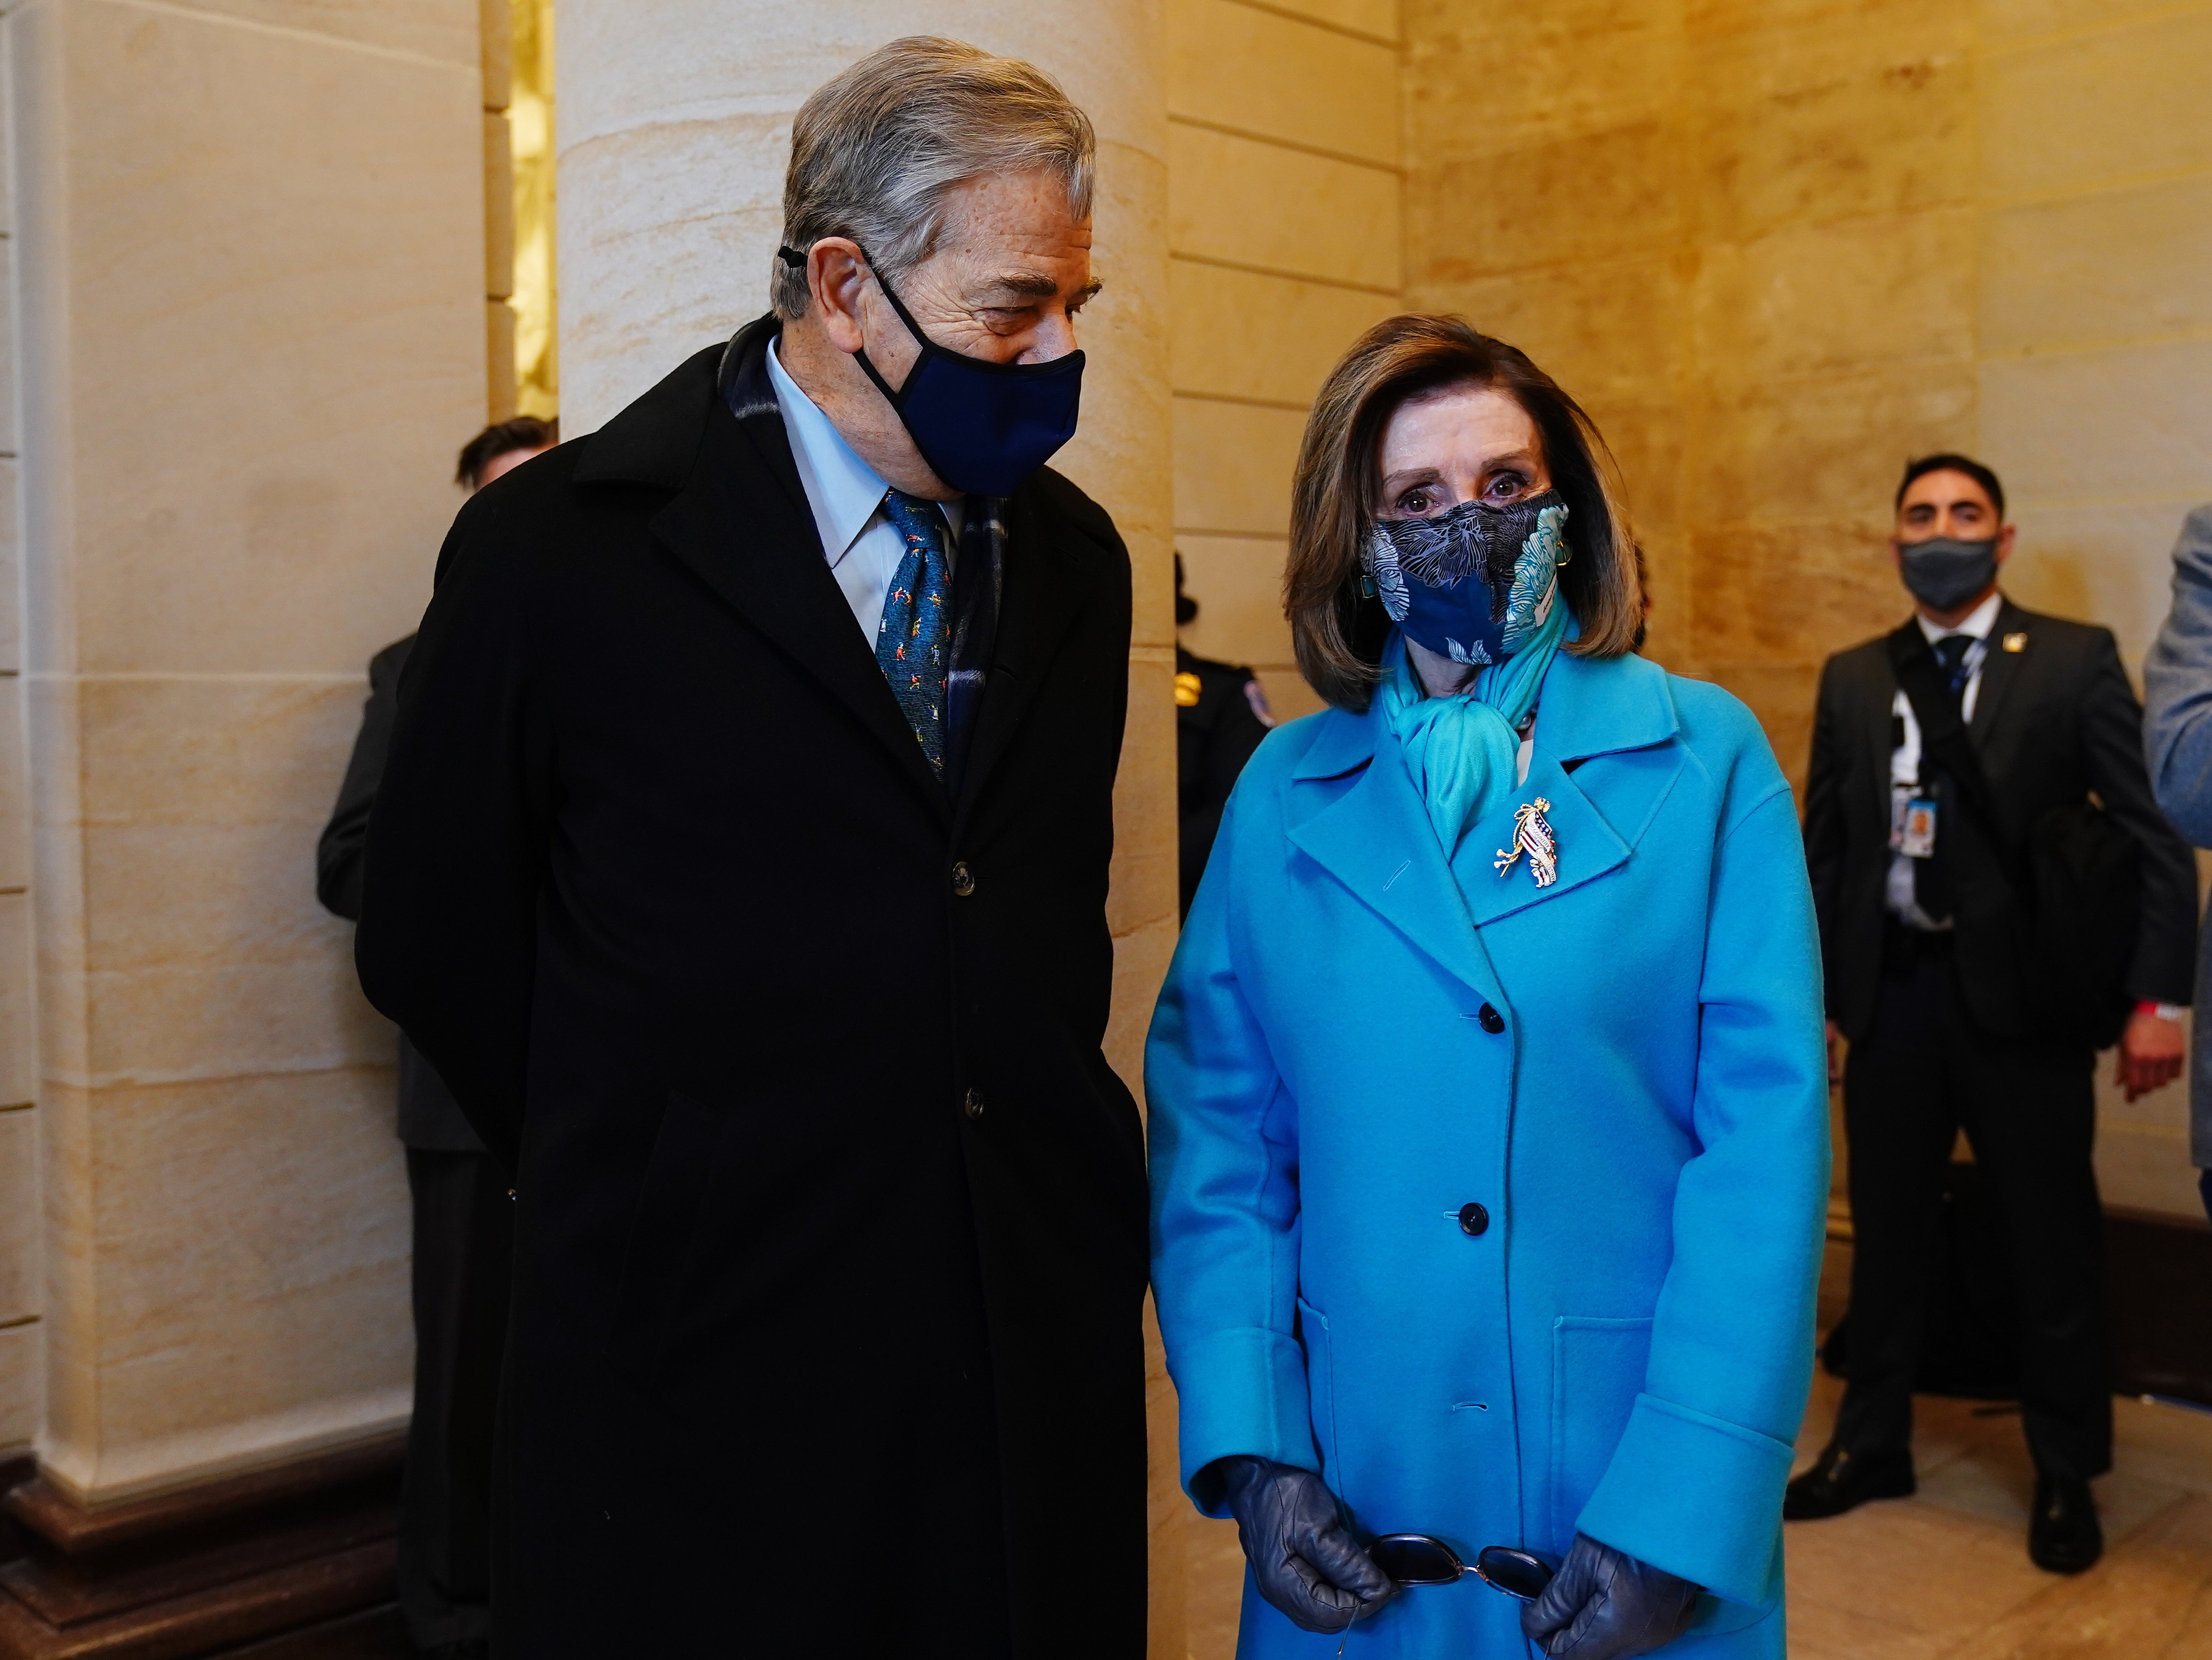 Speaker of the House Nancy Pelosi and her husband ahead of Joe Biden’s arrival at the Capitol for the inauguration ceremony